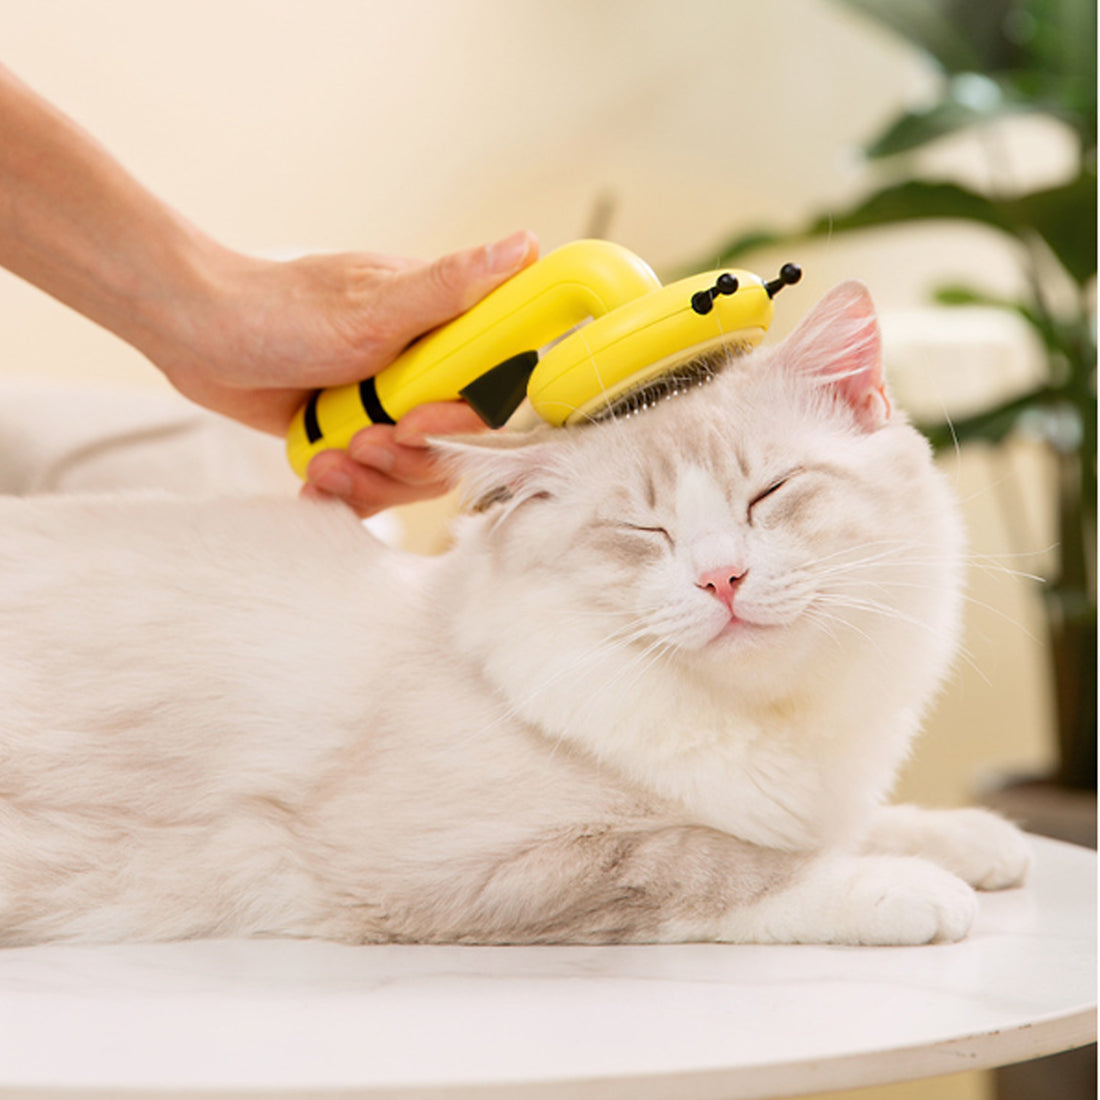 Little Bee Pet Hair Removal Comb: Gentle Grooming Tool for Dogs and Cats